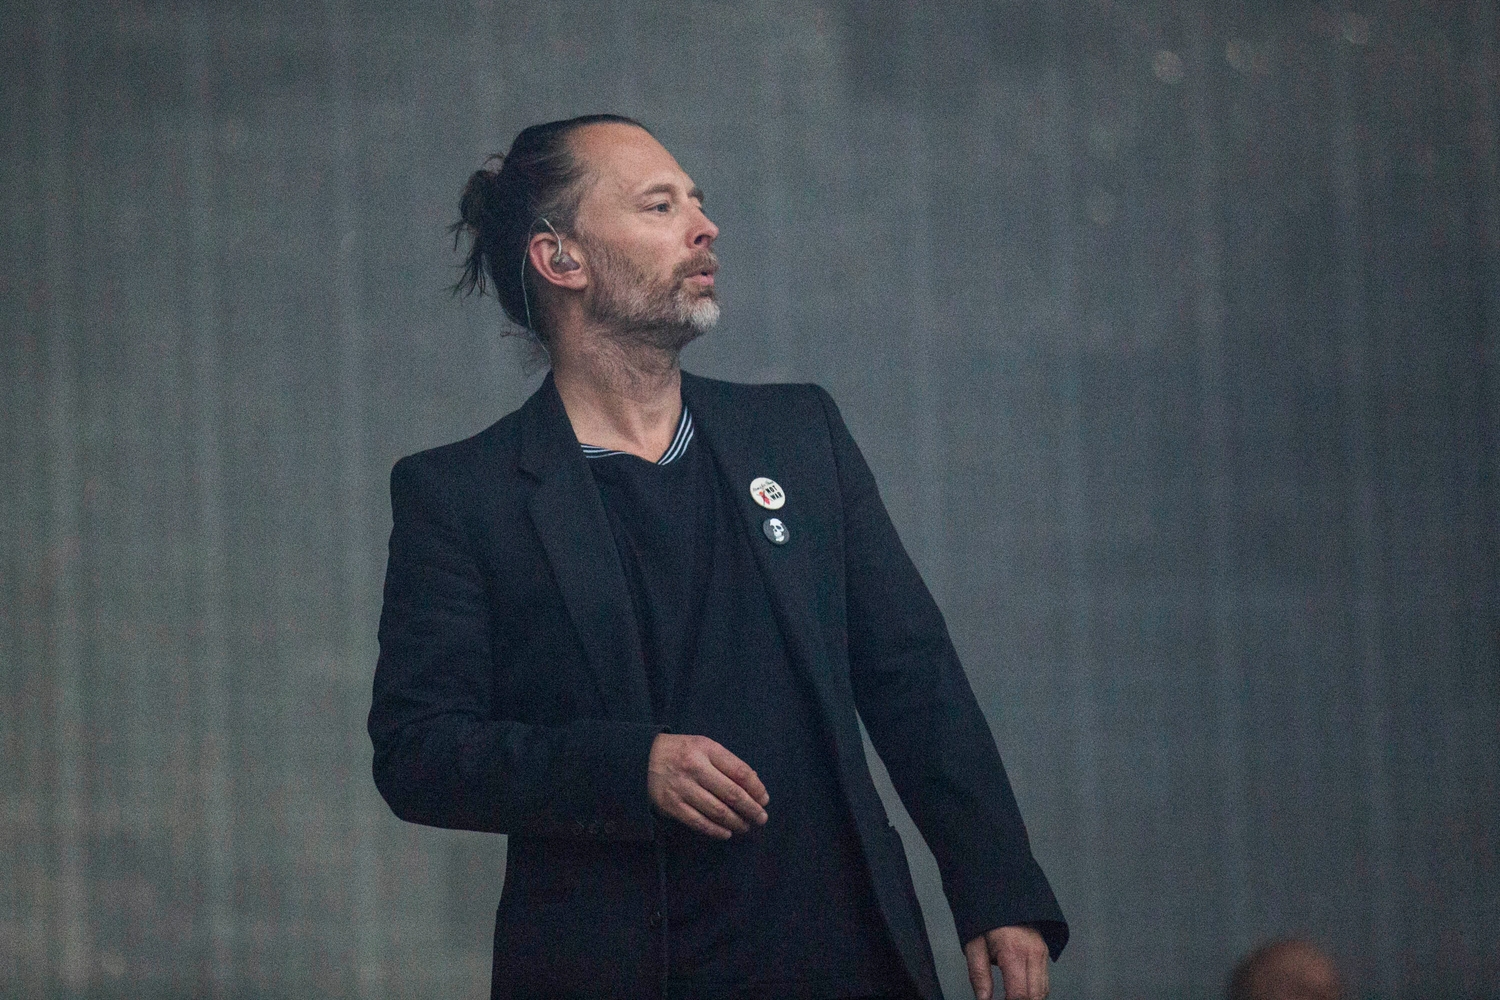 Watch Radiohead give rejected Bond theme 'Spectre' its live debut